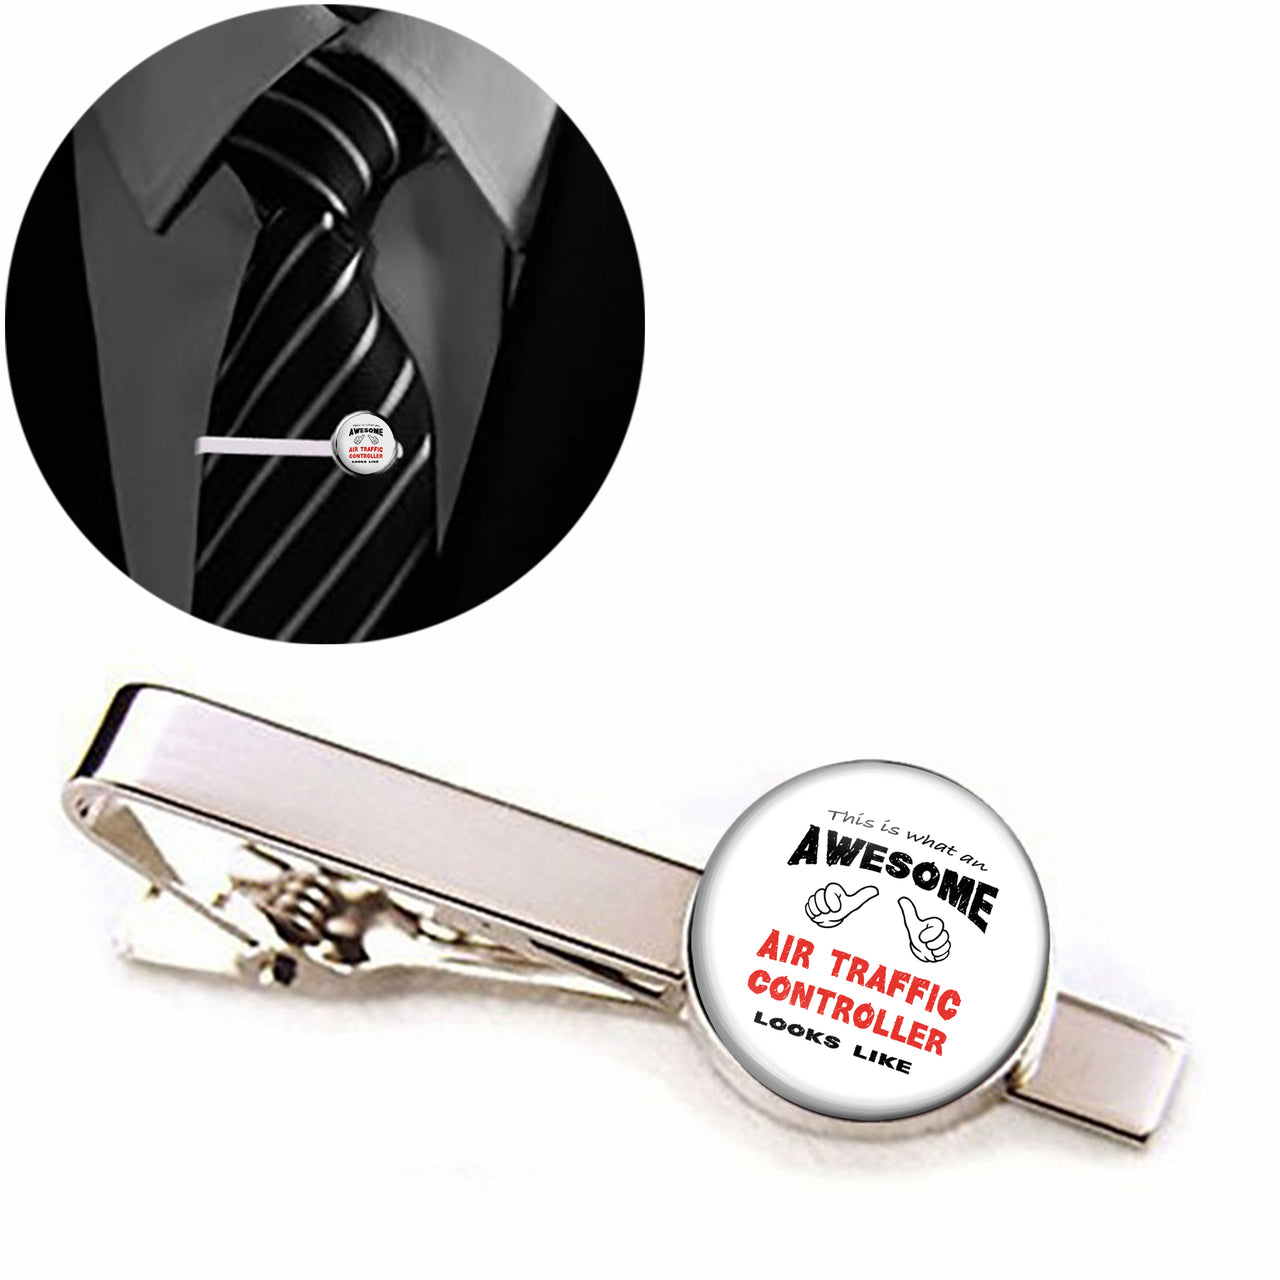 Air Traffic Controller Designed Tie Clips